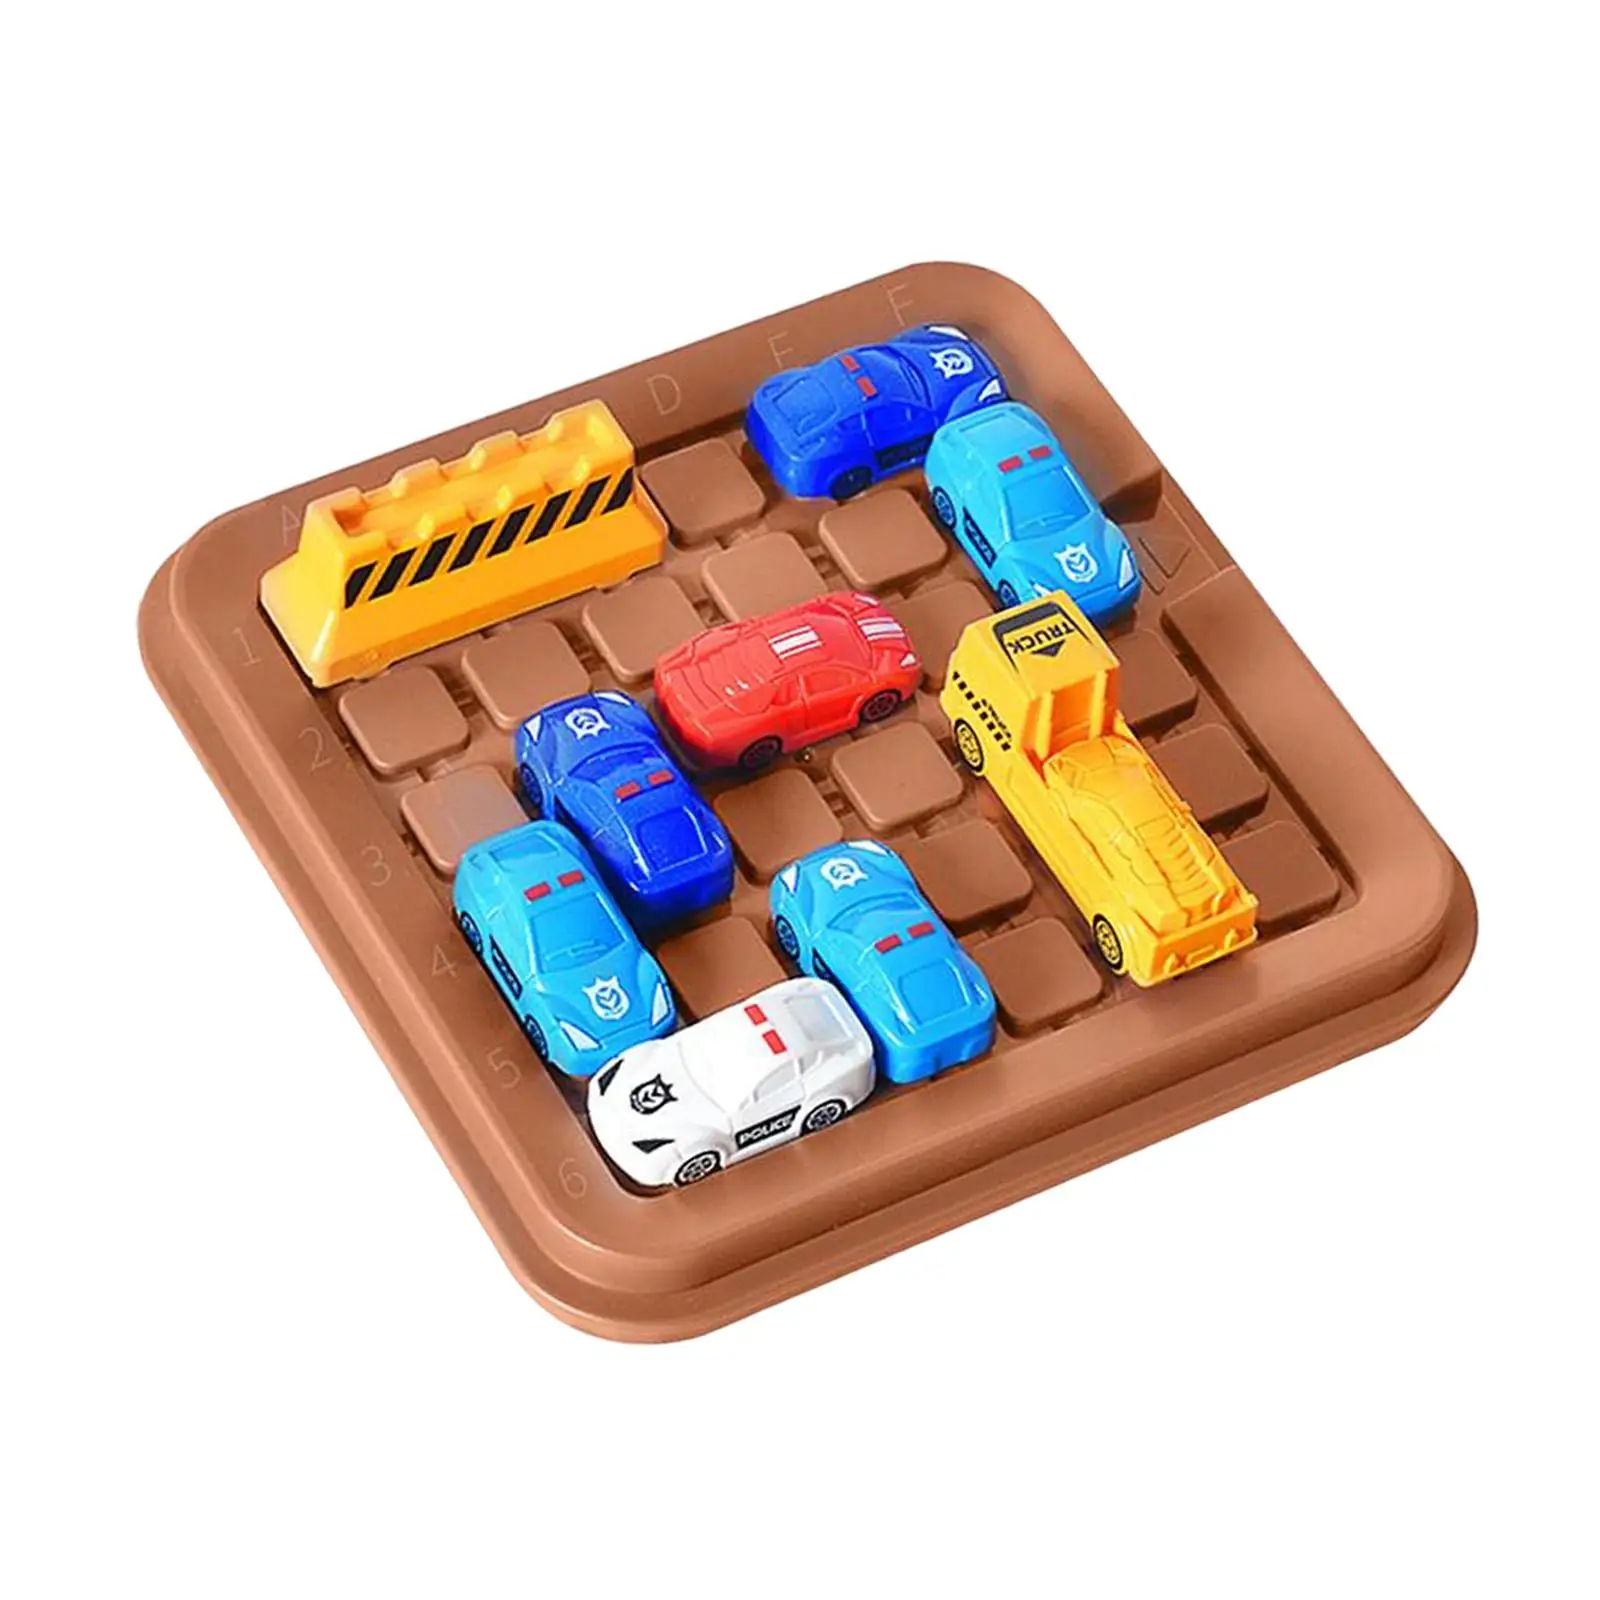 Classic Slide Puzzle Games Educational Toys Logical Thinking Game Tabletop Board Game Sensory Toy Strategy Game for Travel